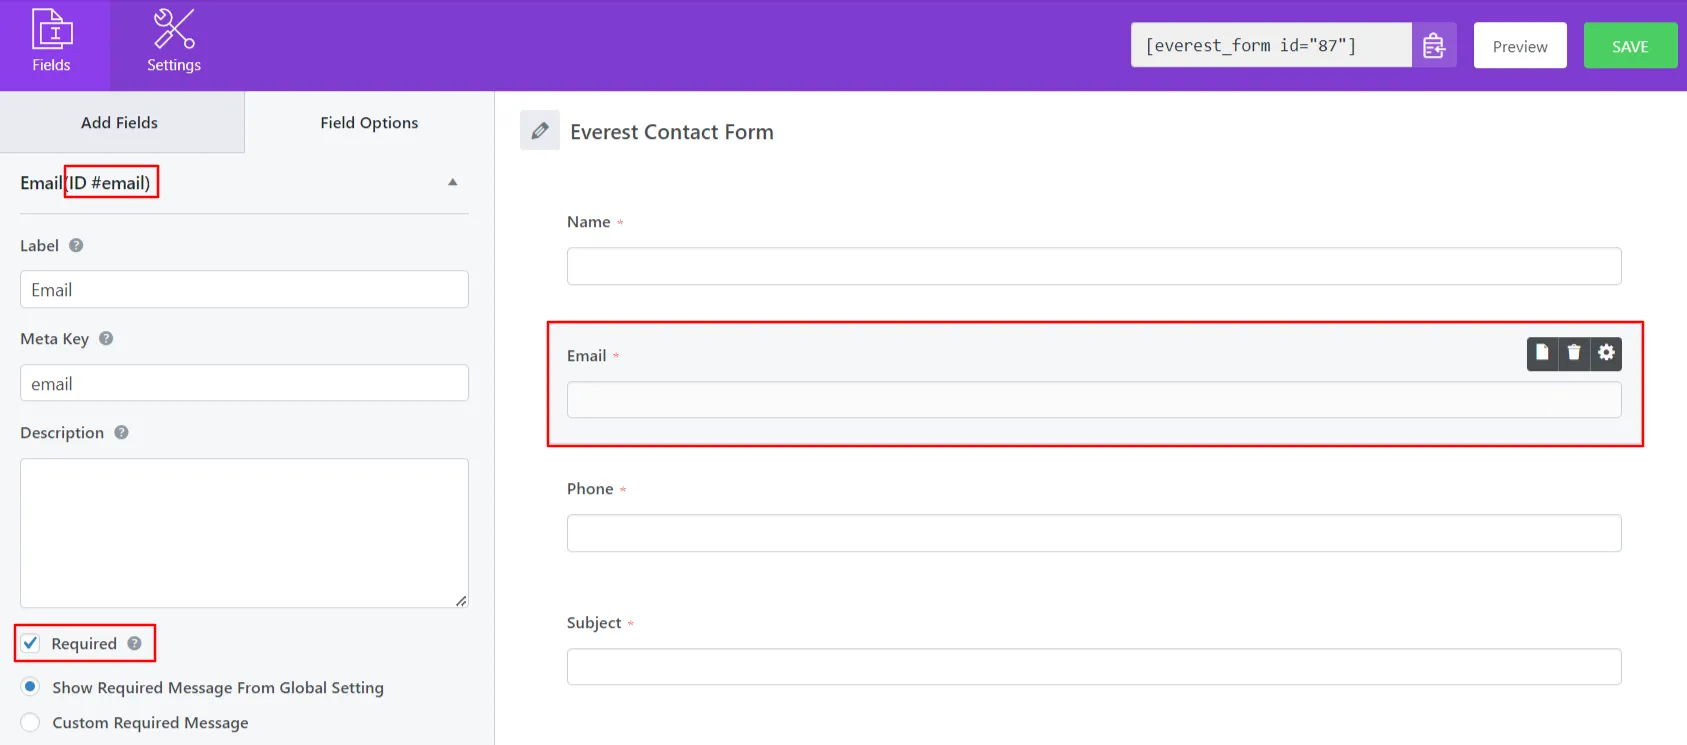 Everest Contact form - Add Phone Verification field